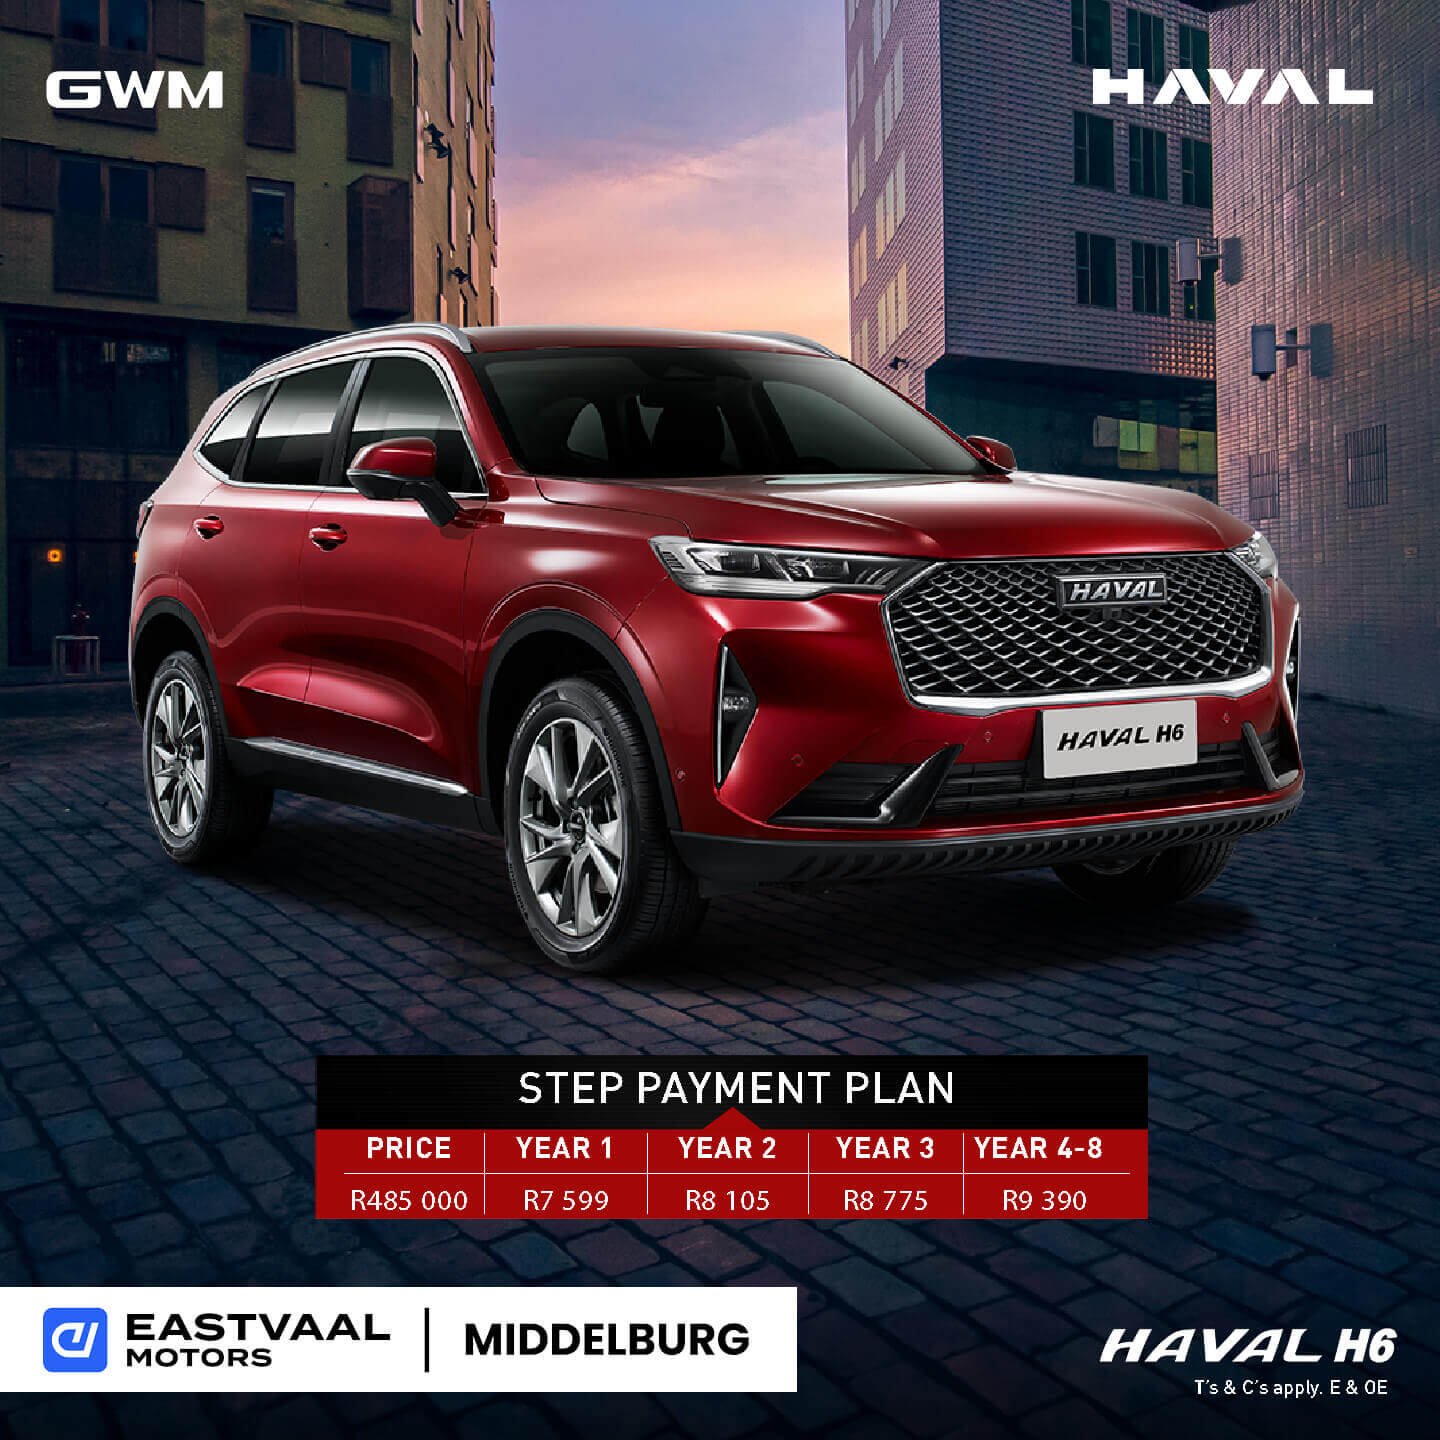 HAVAL H6 image from 